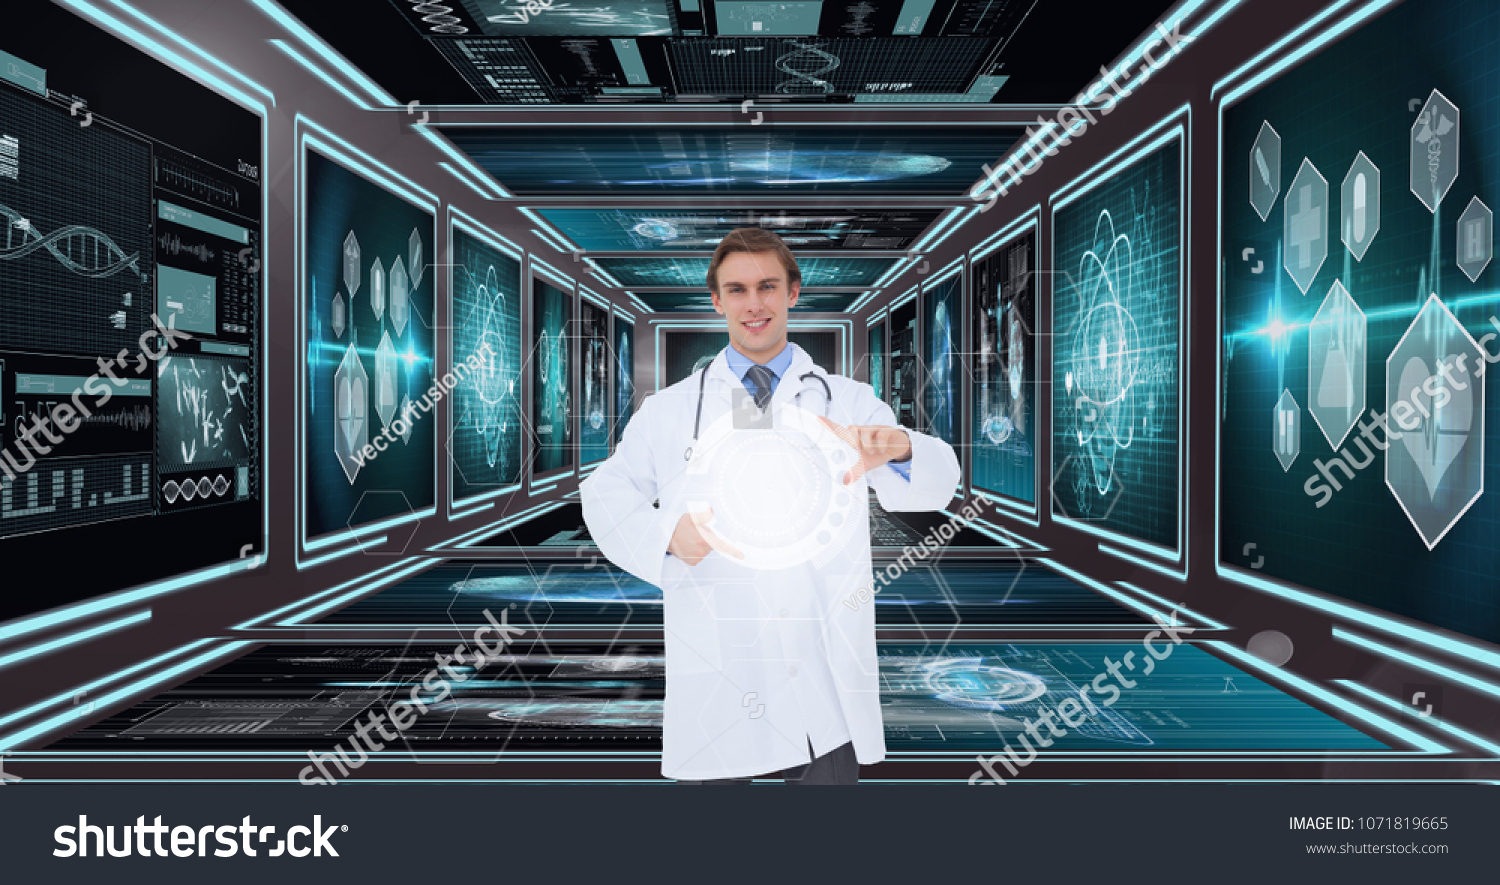 Man doctor interacting with interfaces against background with medical interfaces #1071819665